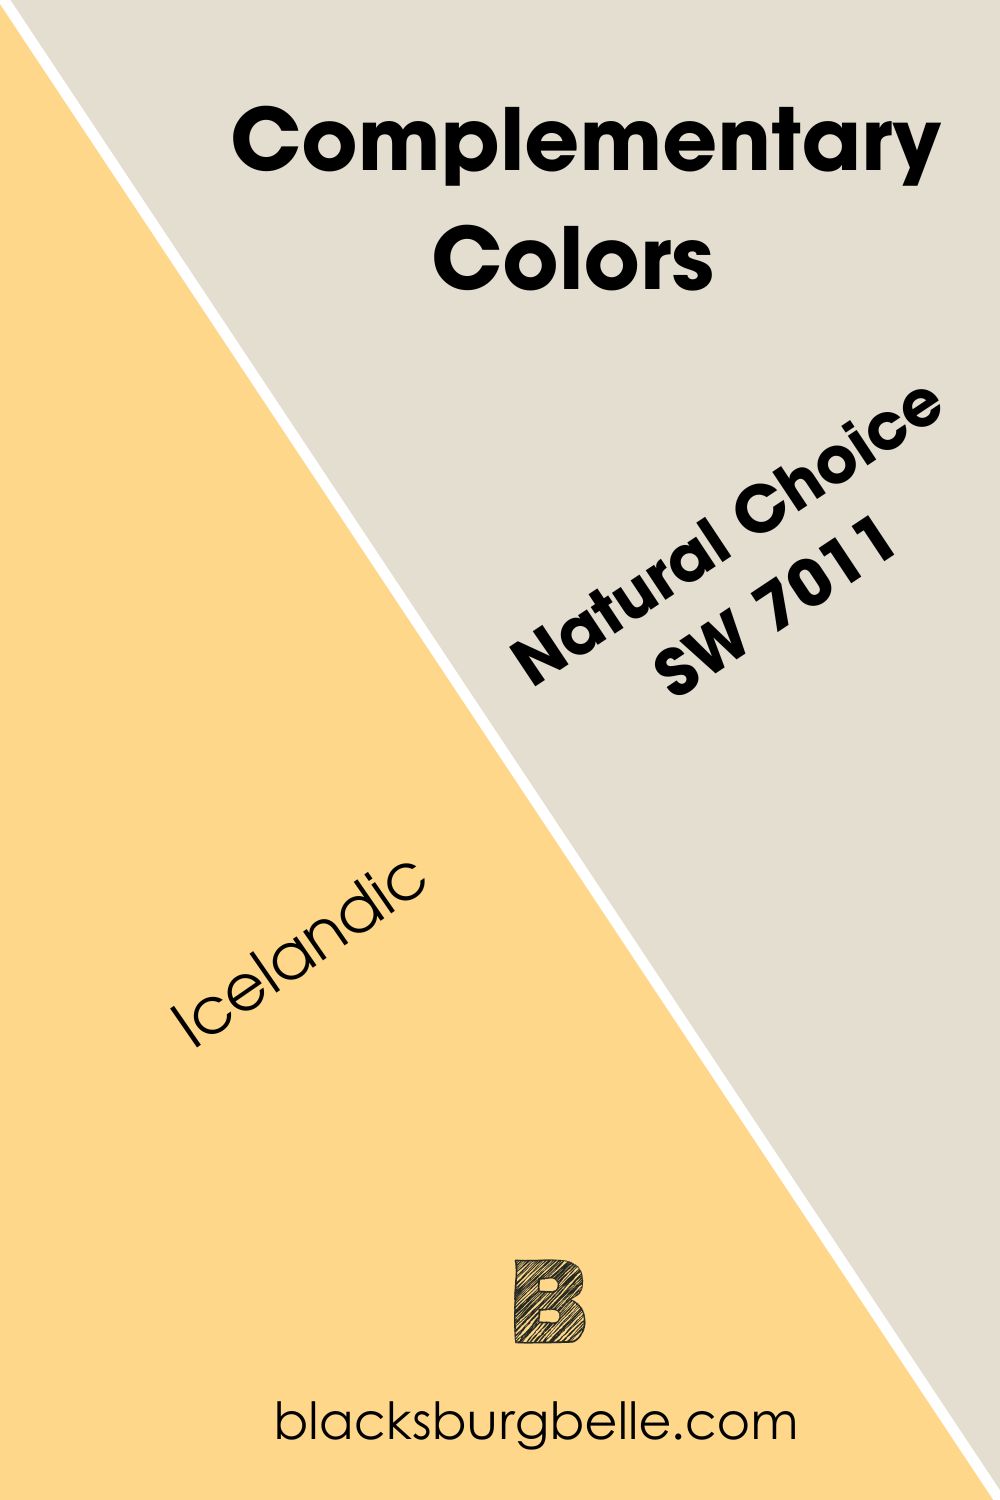 Complementary Colors for Natural Choice